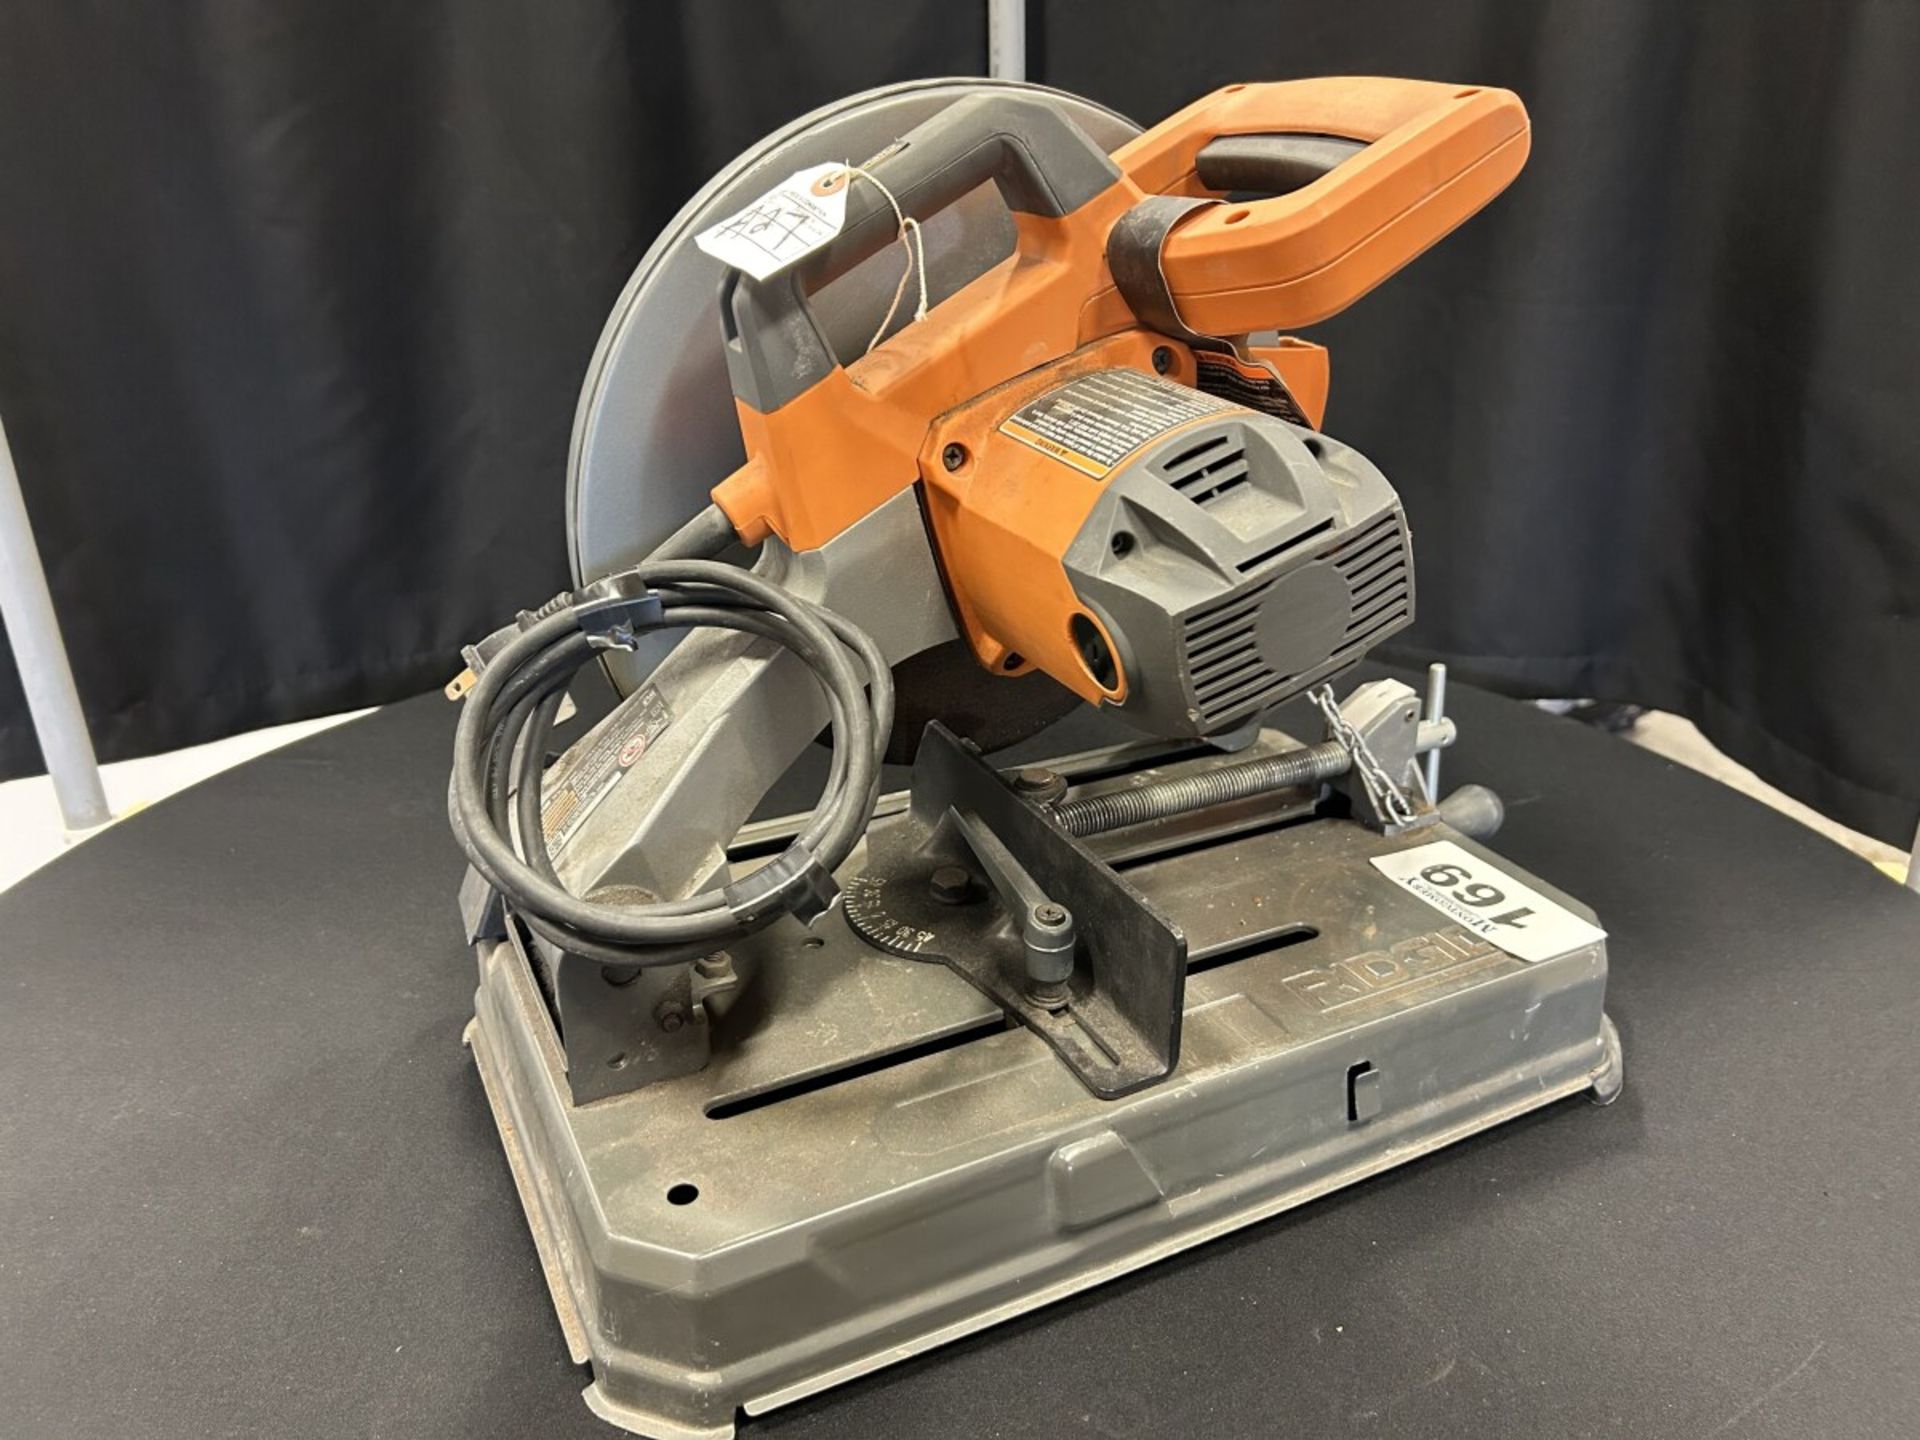 RIDGID 14IN CHOP SAW MODELR41422 - A27 - Image 3 of 4